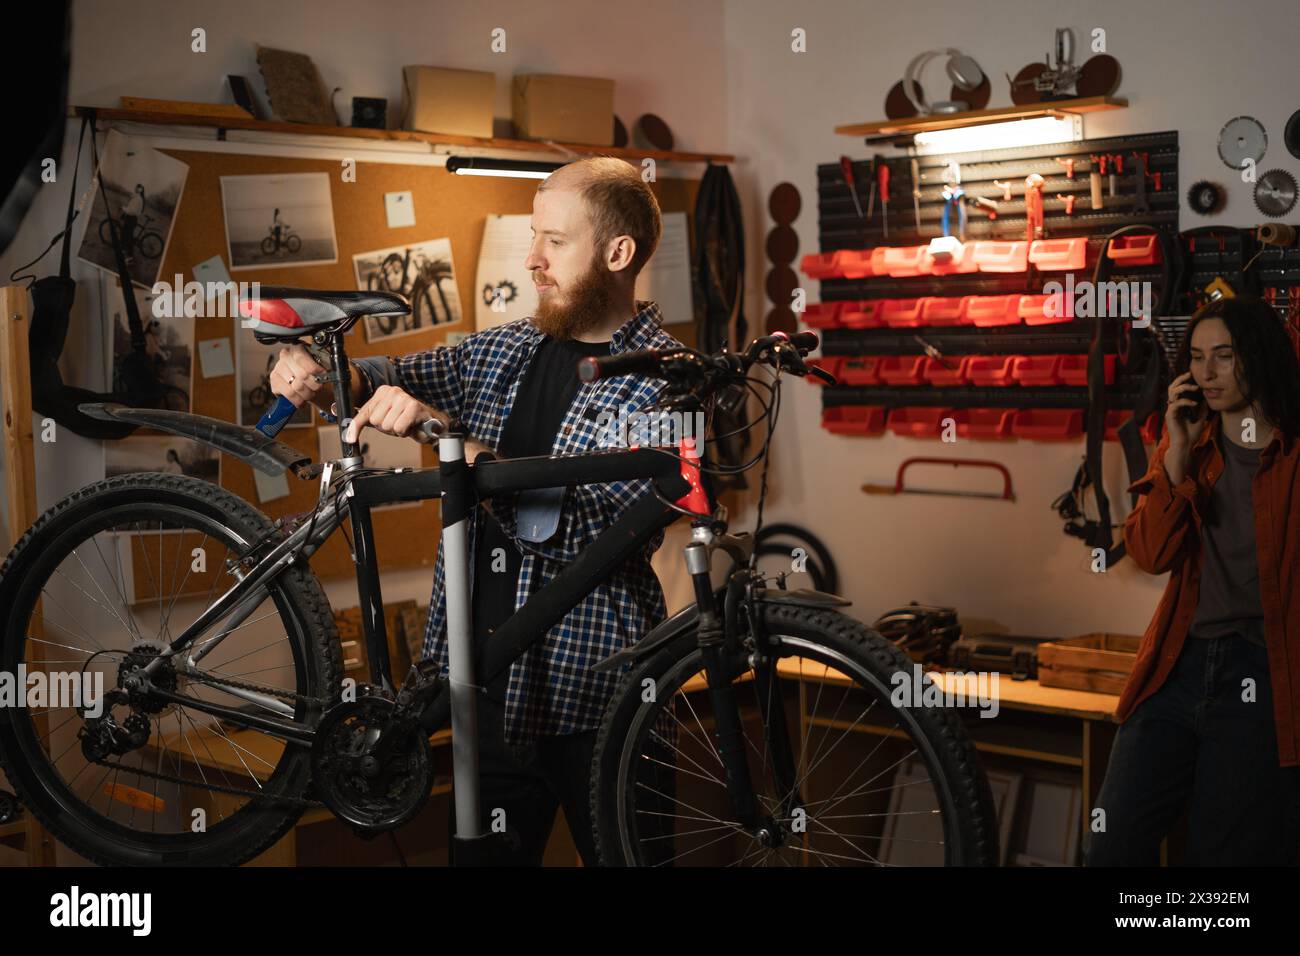 Male mechanic repairing a bicycle in a workshop or garage, his woman waiting in the background. Bike Maintenance Stock Photo